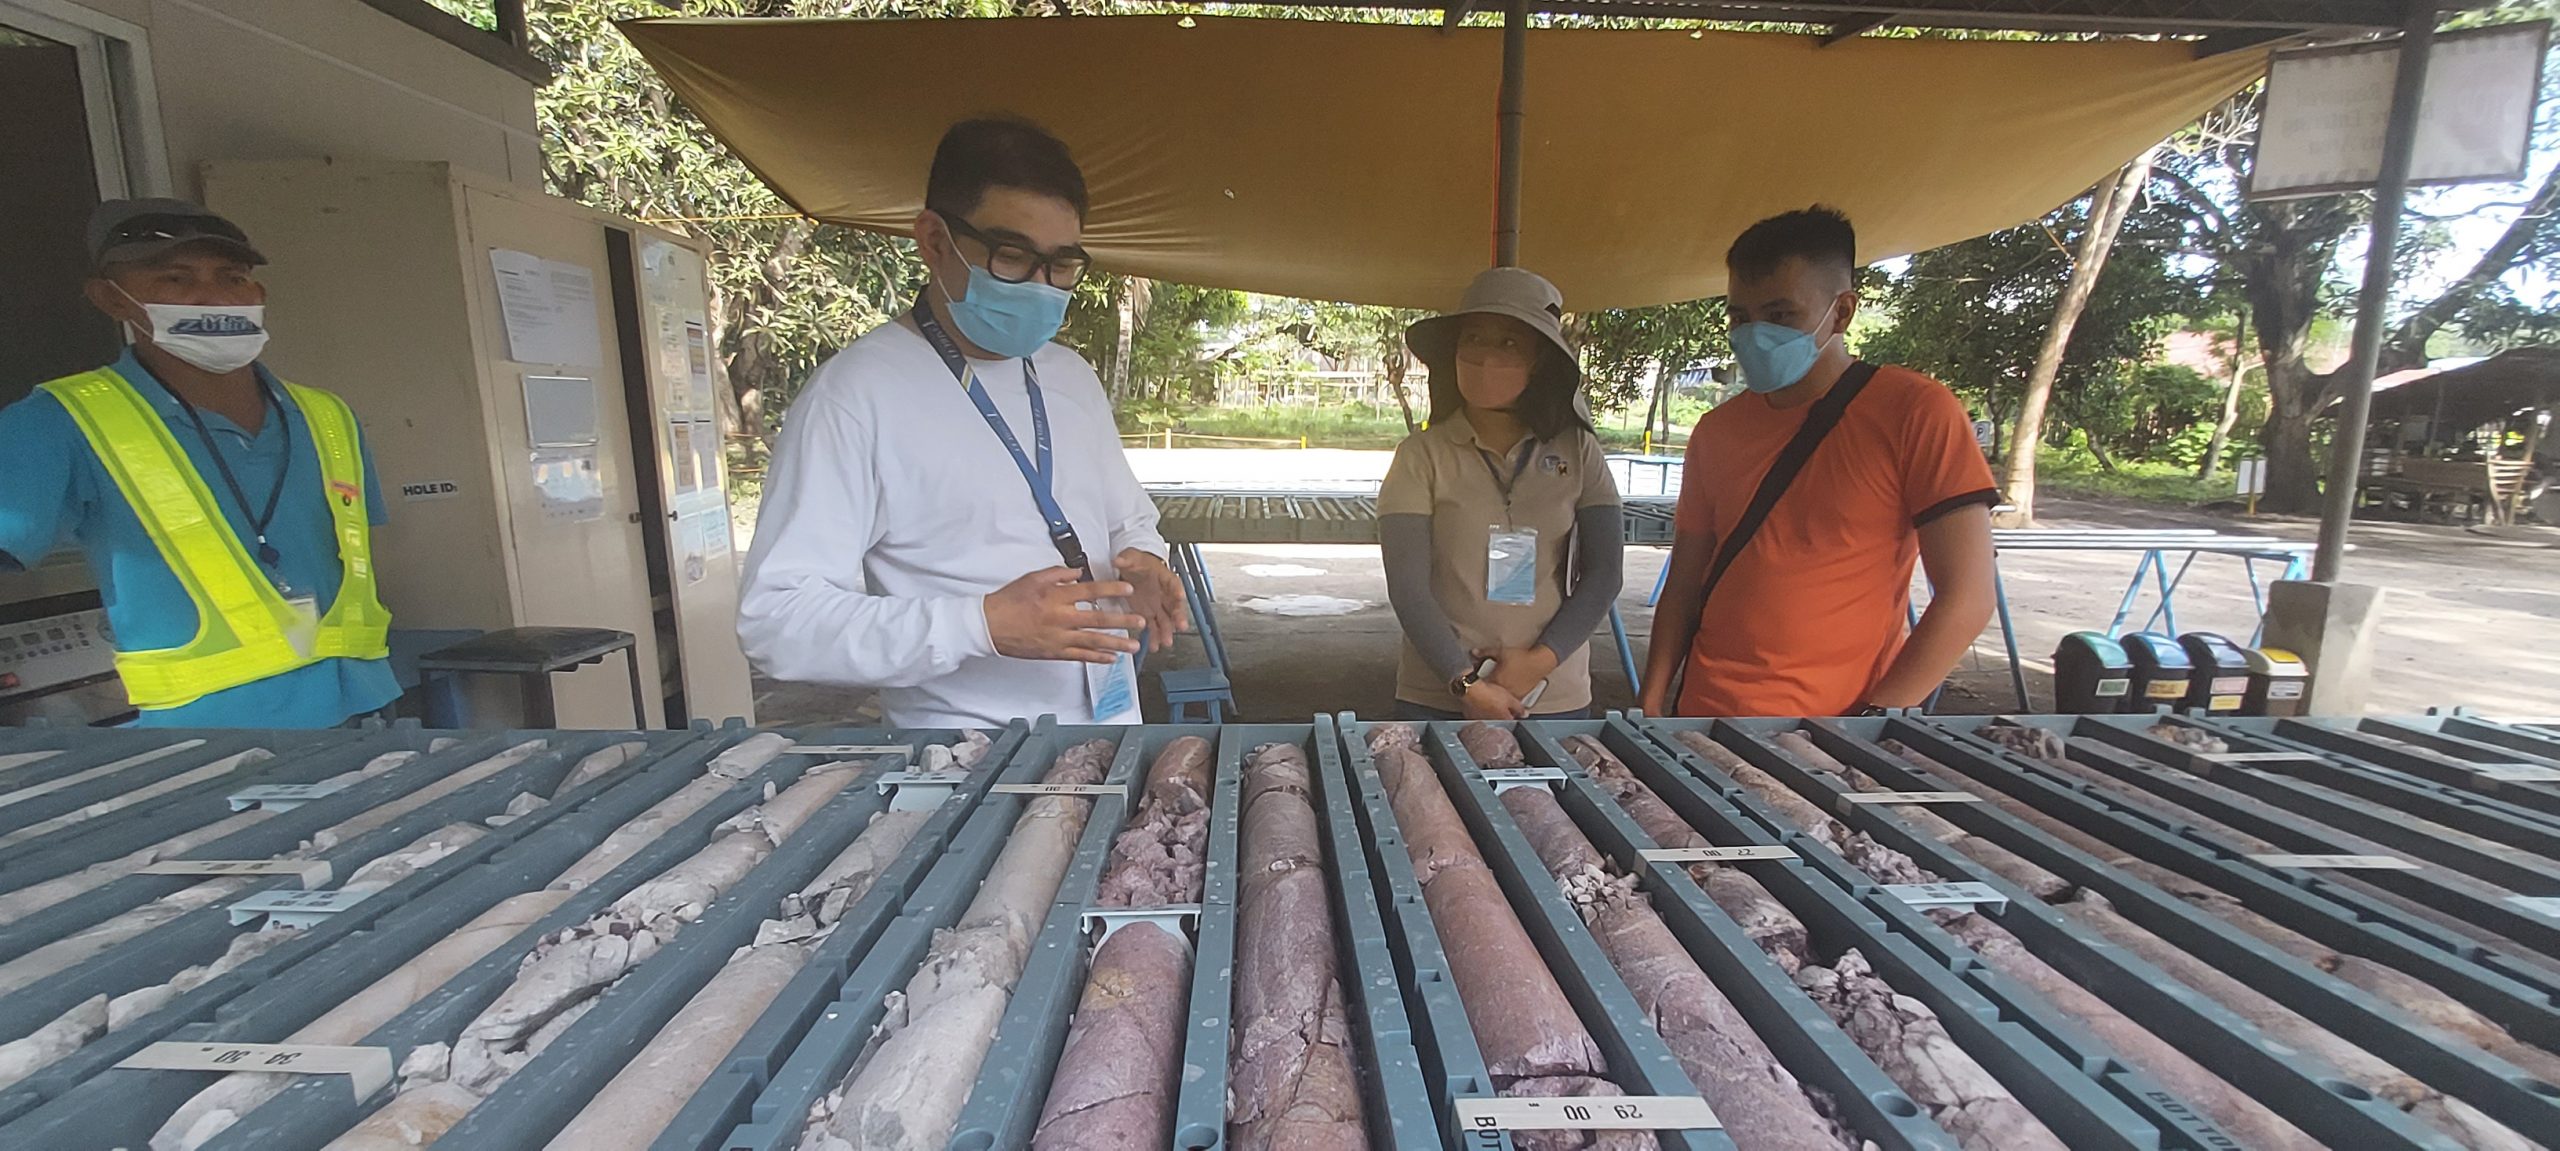 Celsius confirms copper near surface at Sagay Project